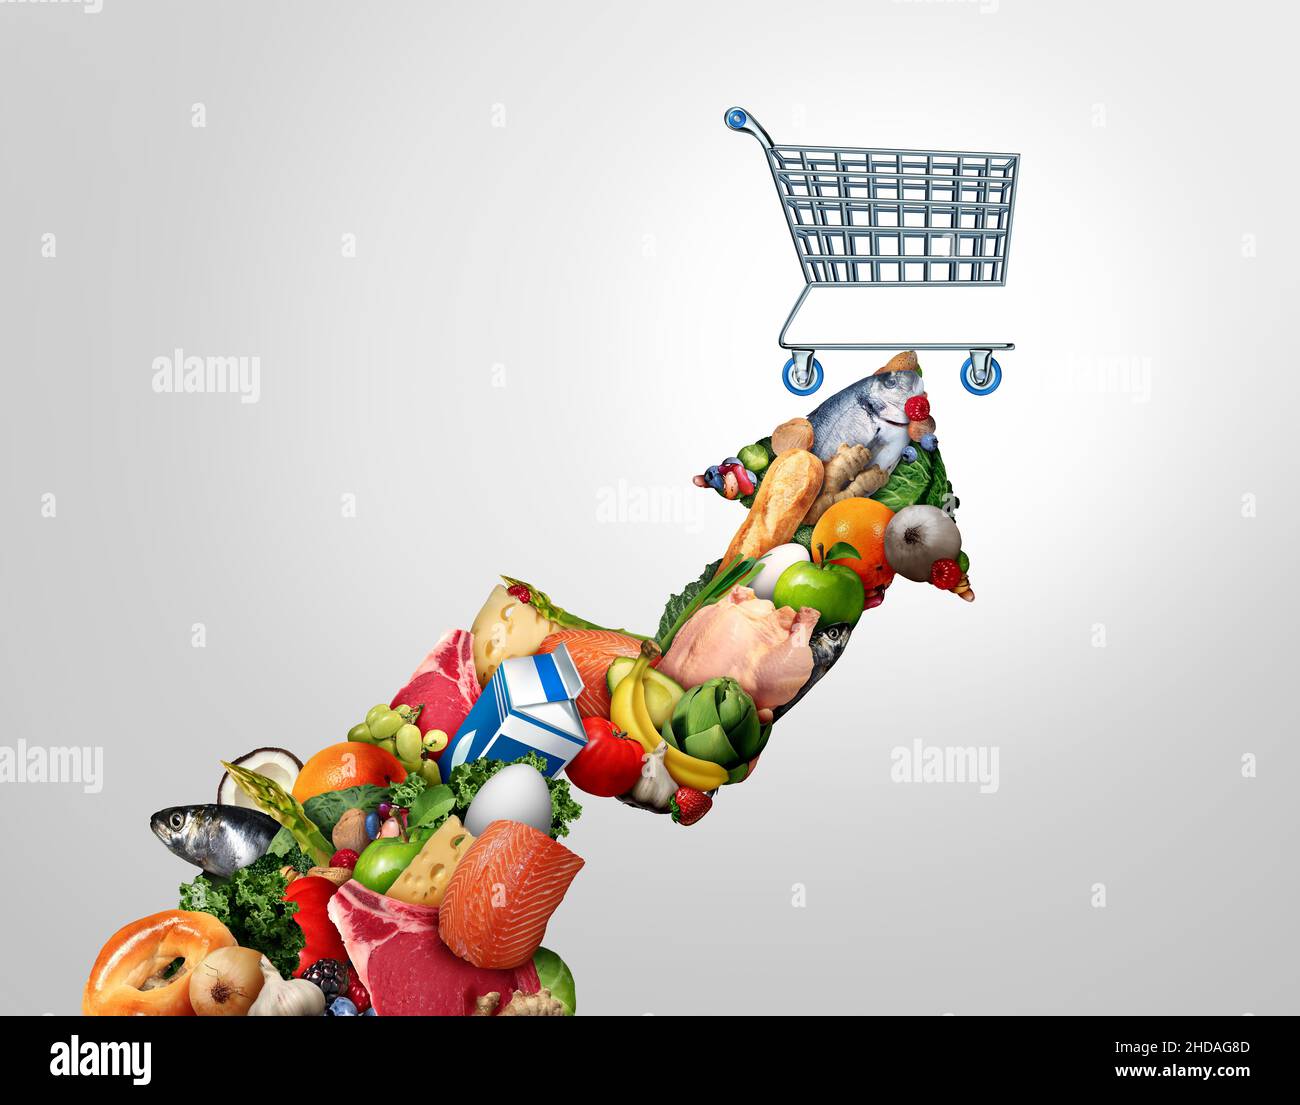 Grocery Inflation and rising food prices or surging cost of supermarket groceries as an inflationary financial crisis concept and the rise of costs. Stock Photo